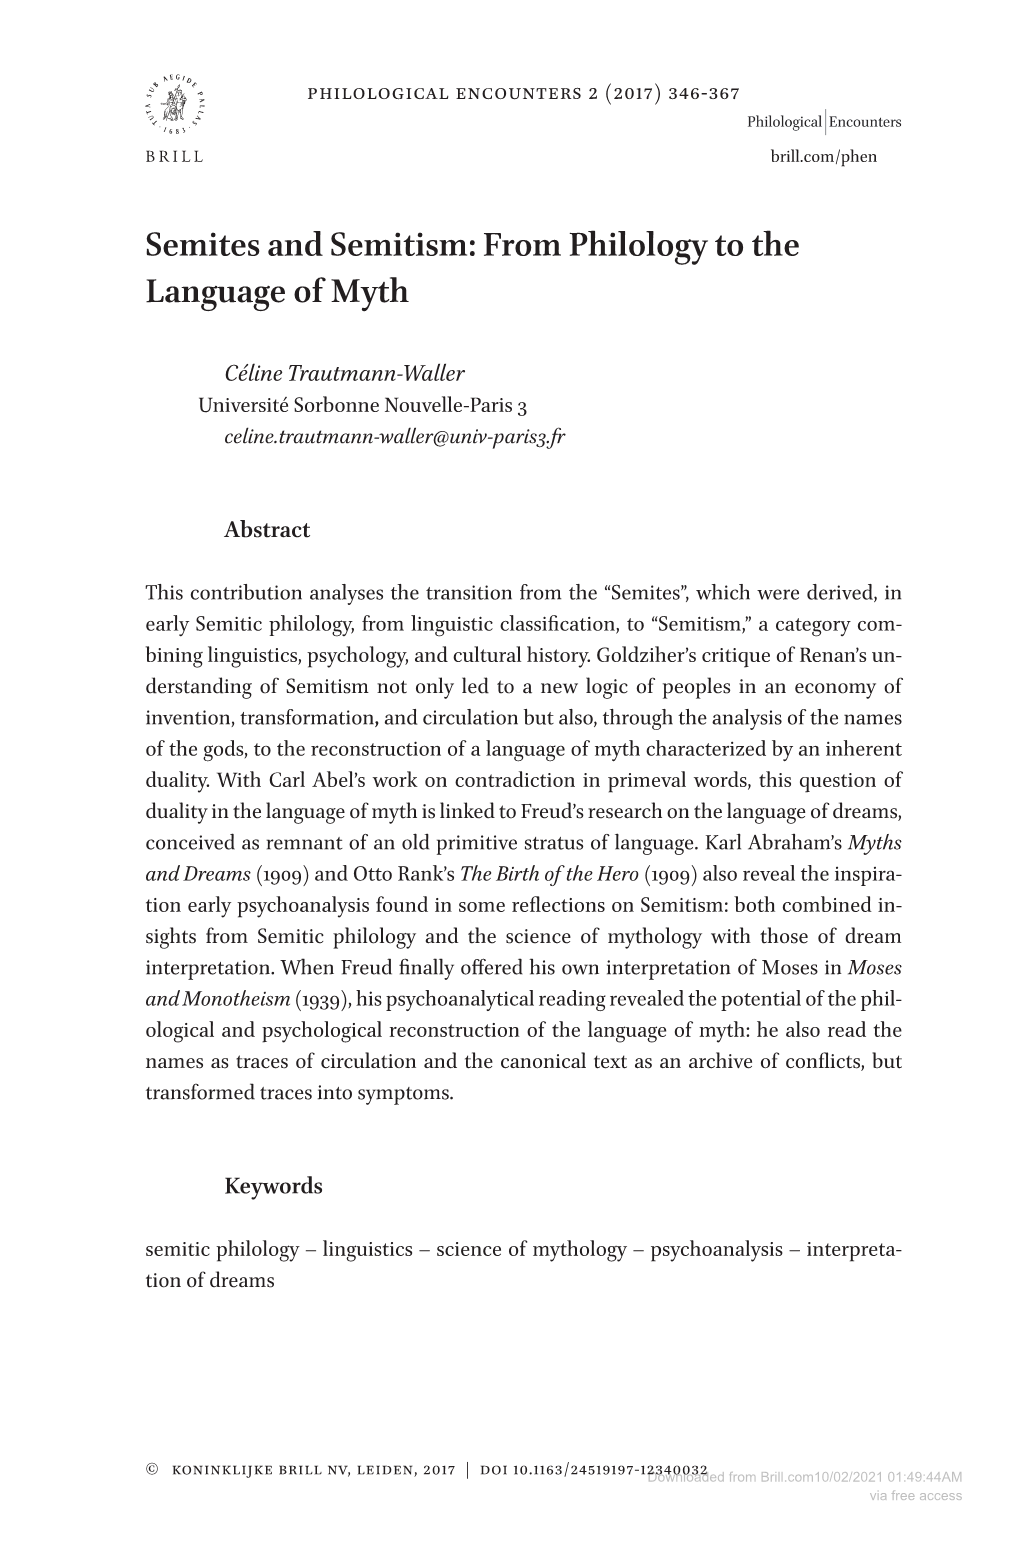 Semites and Semitism: from Philology to the Language of Myth